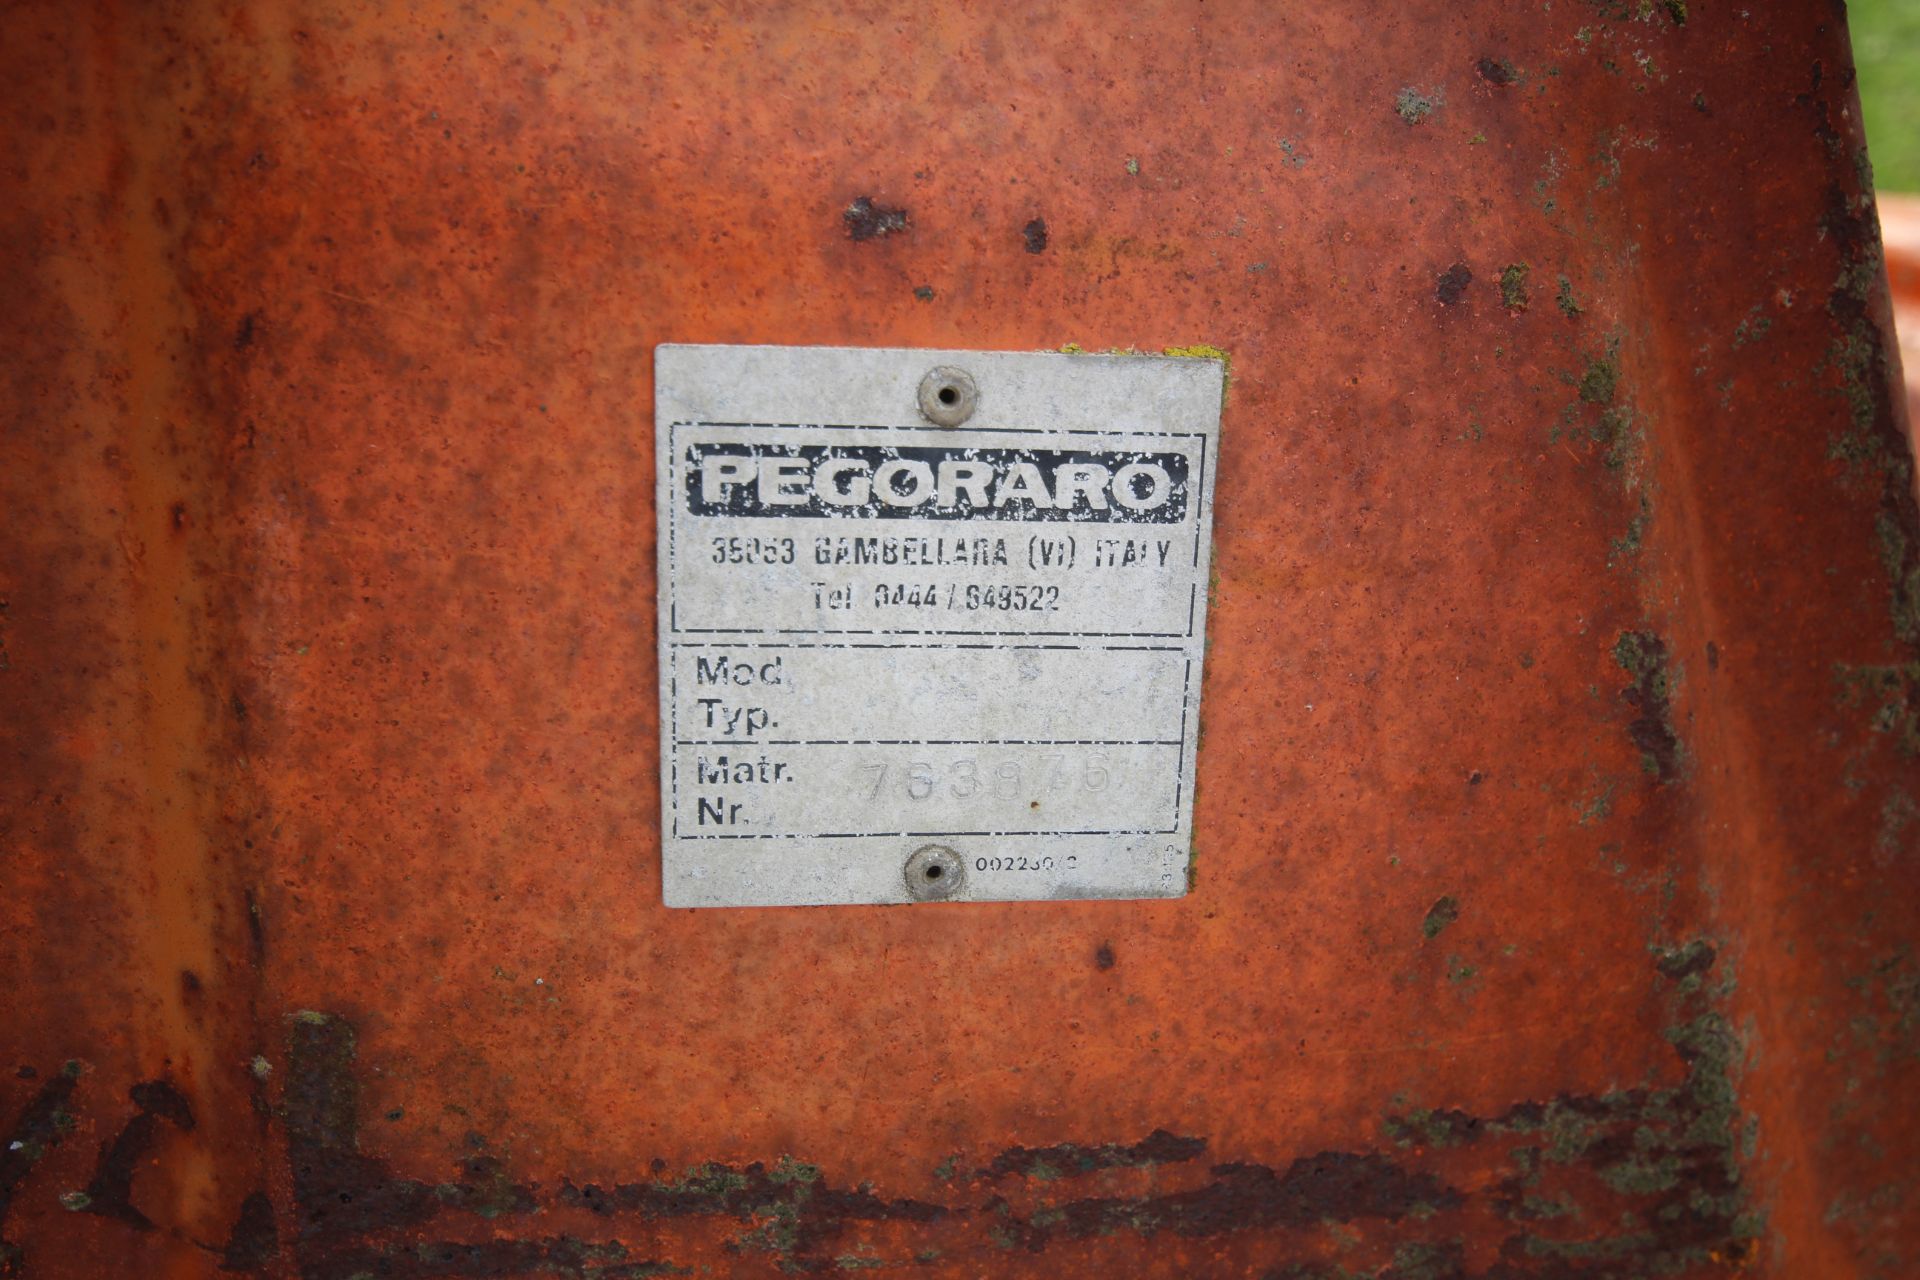 Westmac Pegararo 3m power harrow. Vendor reports owned since 2001 and used regularly. For sale due - Bild 16 aus 16